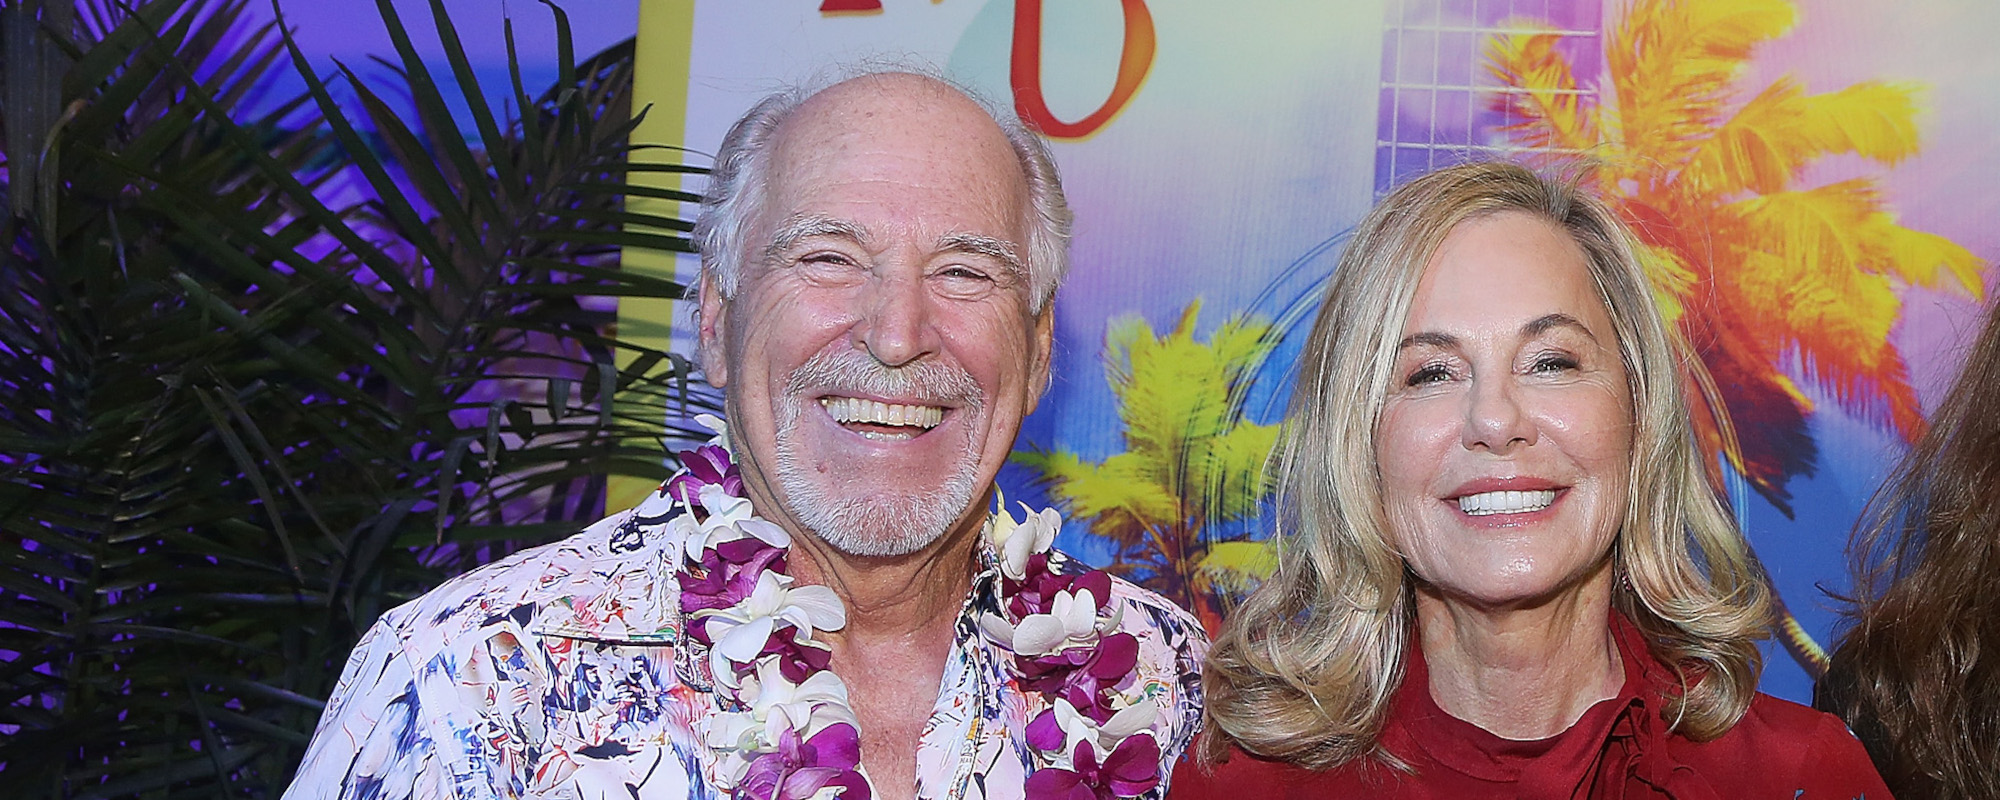 Jimmy Buffett’s Wife, Jane, Shares Heartfelt Message Following Husband’s Death—”Thank You for Giving Joy to Him and to Me”